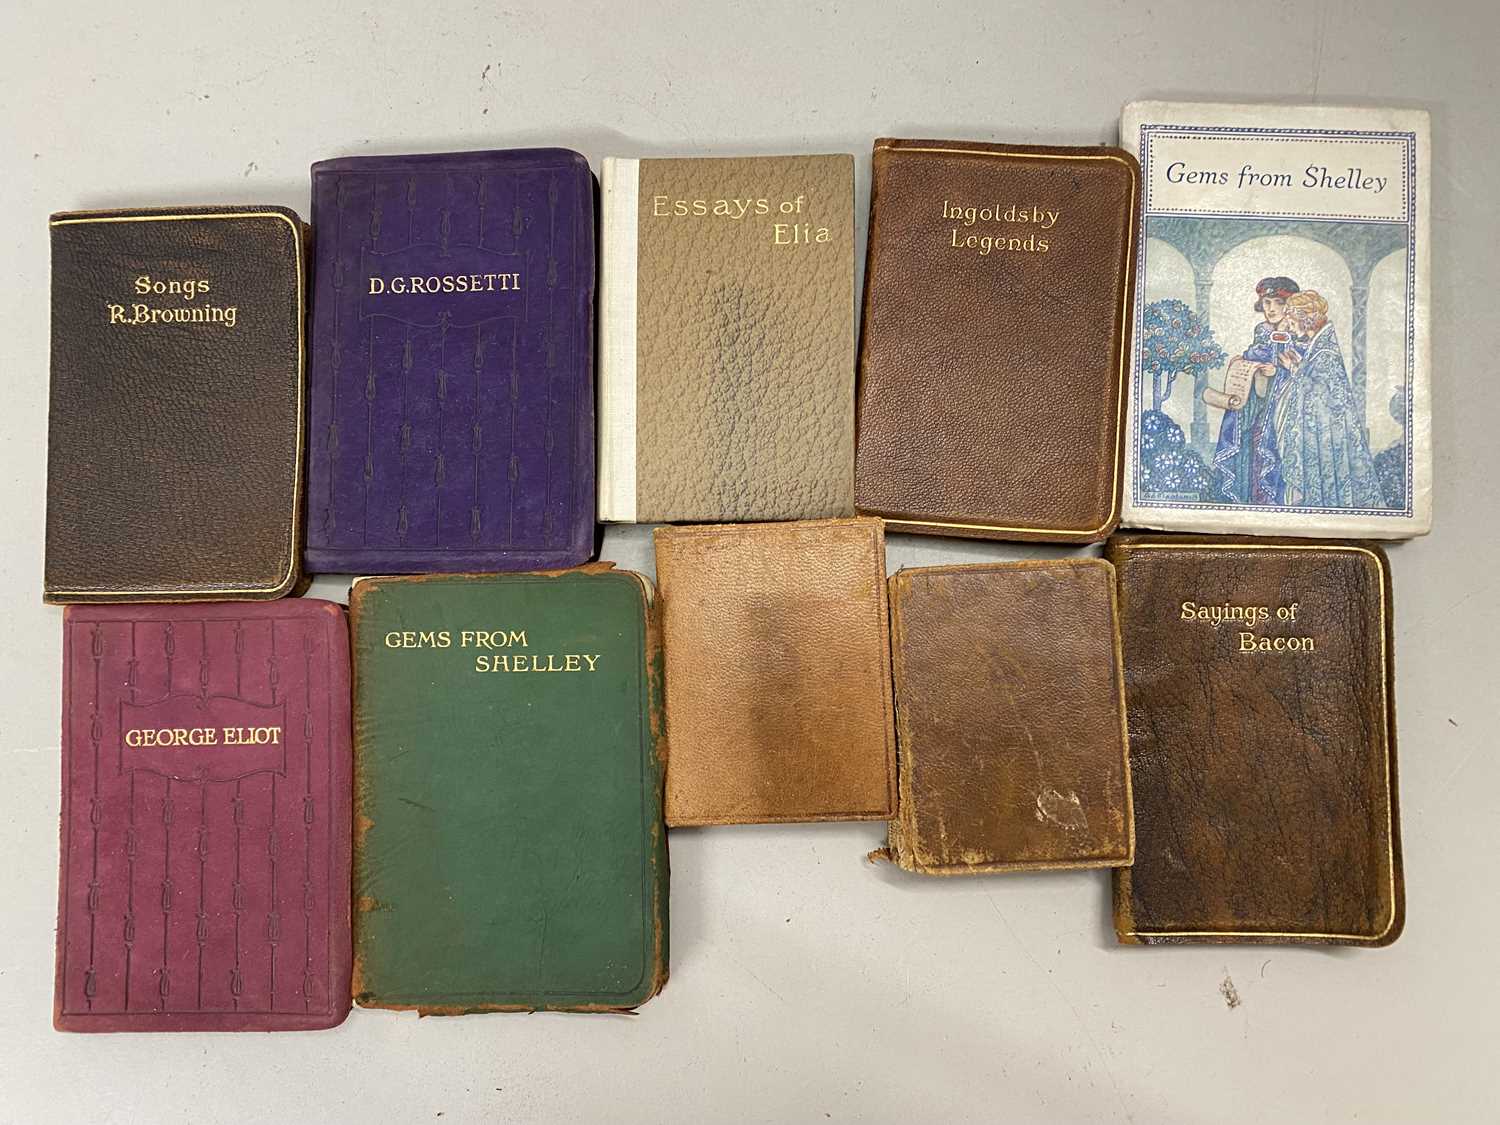 Mixed Lot: Various miniature books to include George Elliot, songs by Browning, Essays of Elia,